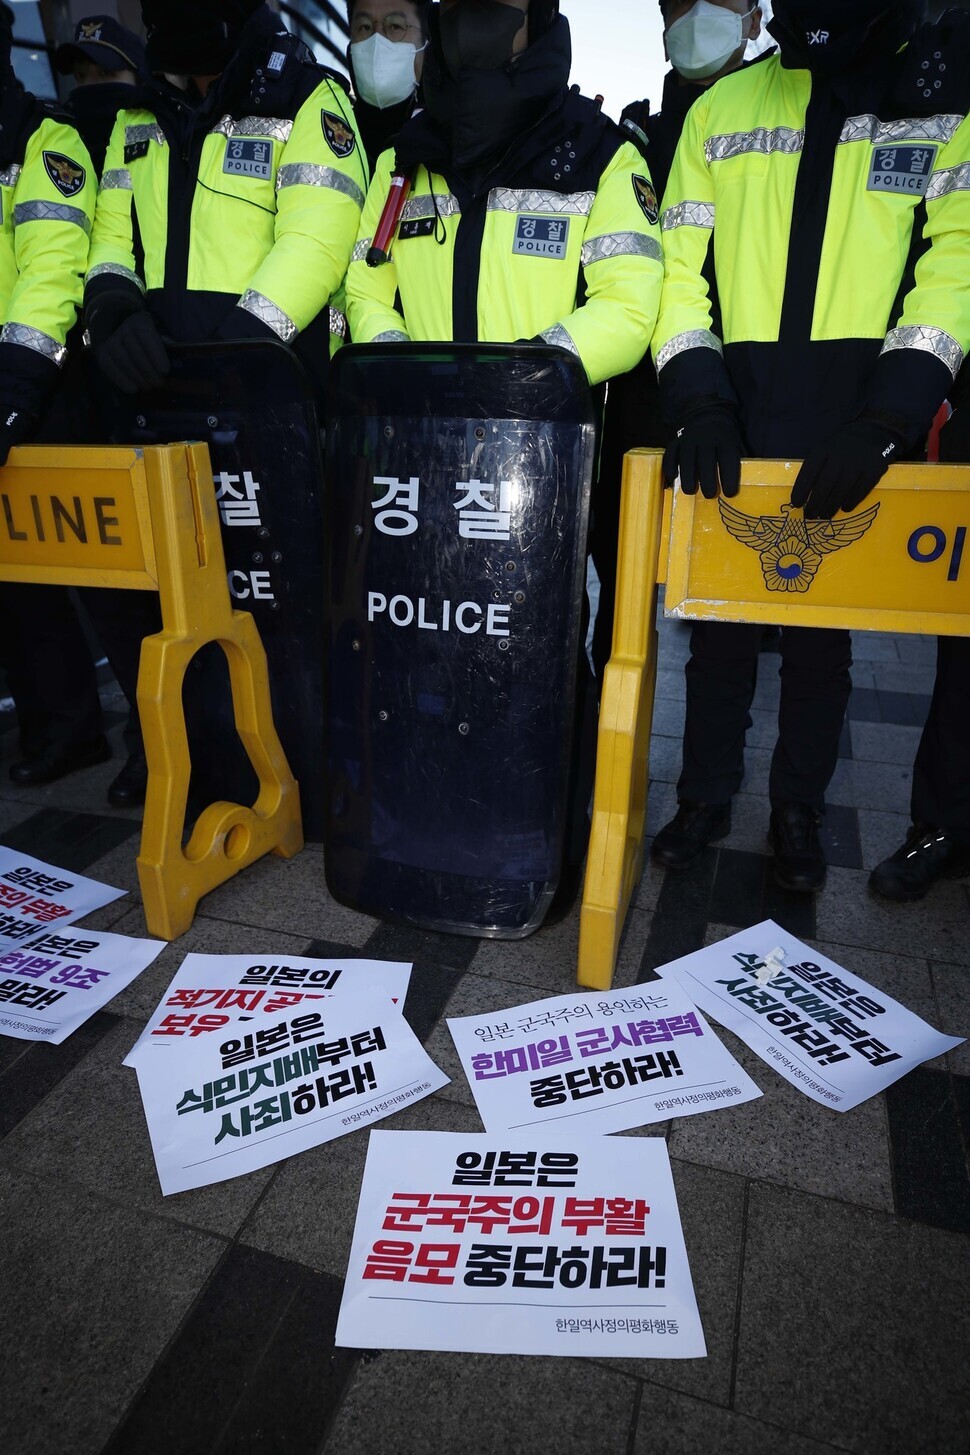 Signs lie at the feet of police who prevented Joint Action for Historical Justice and Peaceful Korea-Japan Relations from presenting a letter of protest to the Japanese Embassy during their Dec. 20 press conference.